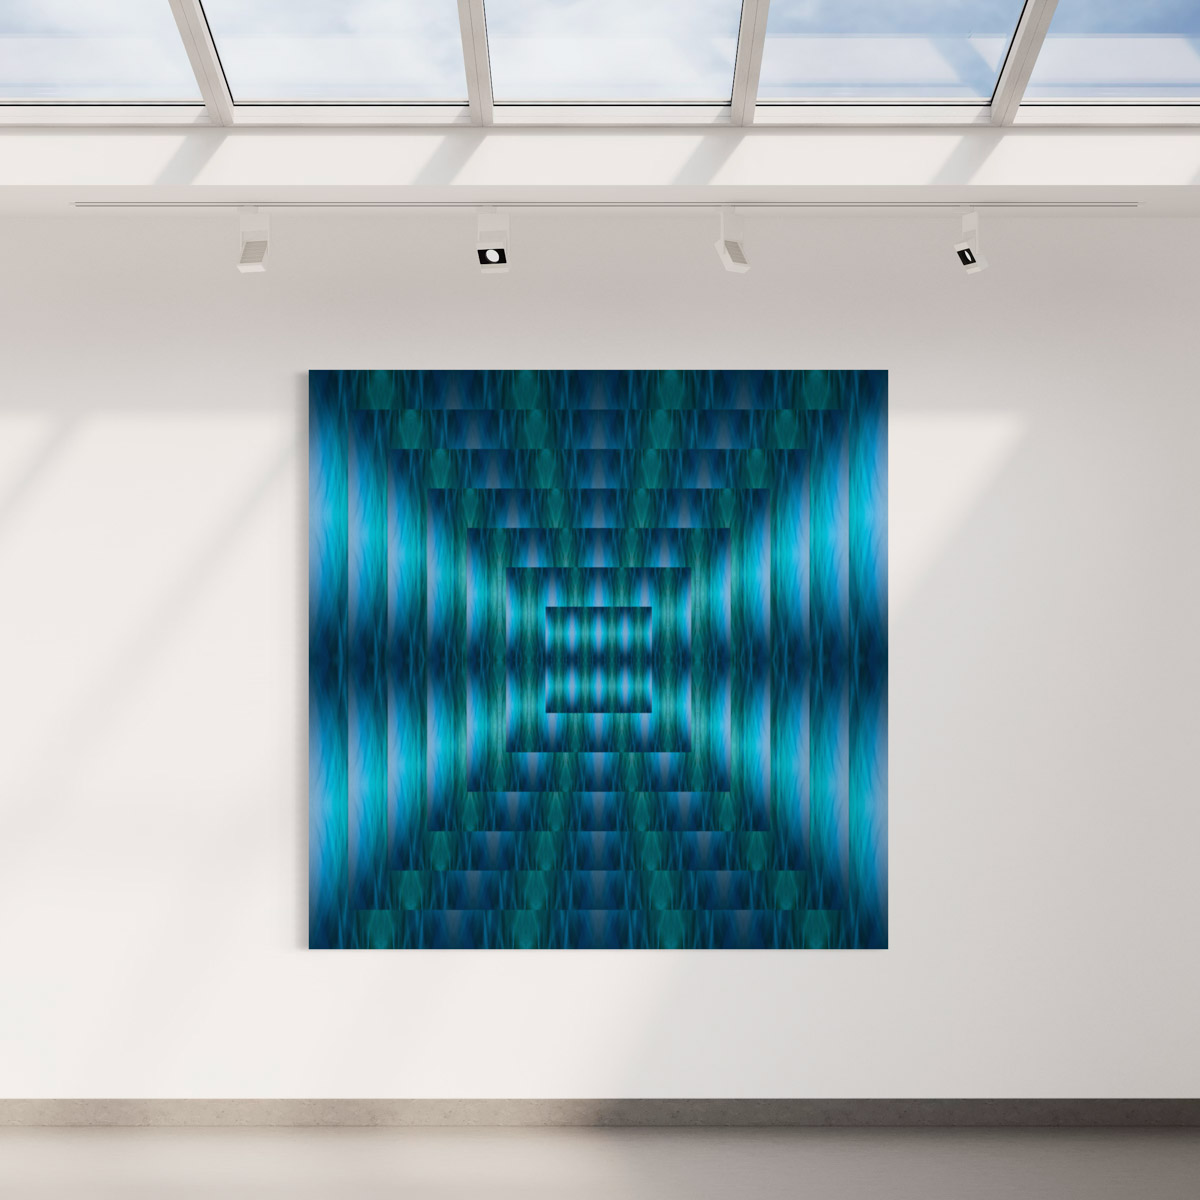 A large blue and green abstract painting in the middle of a room.